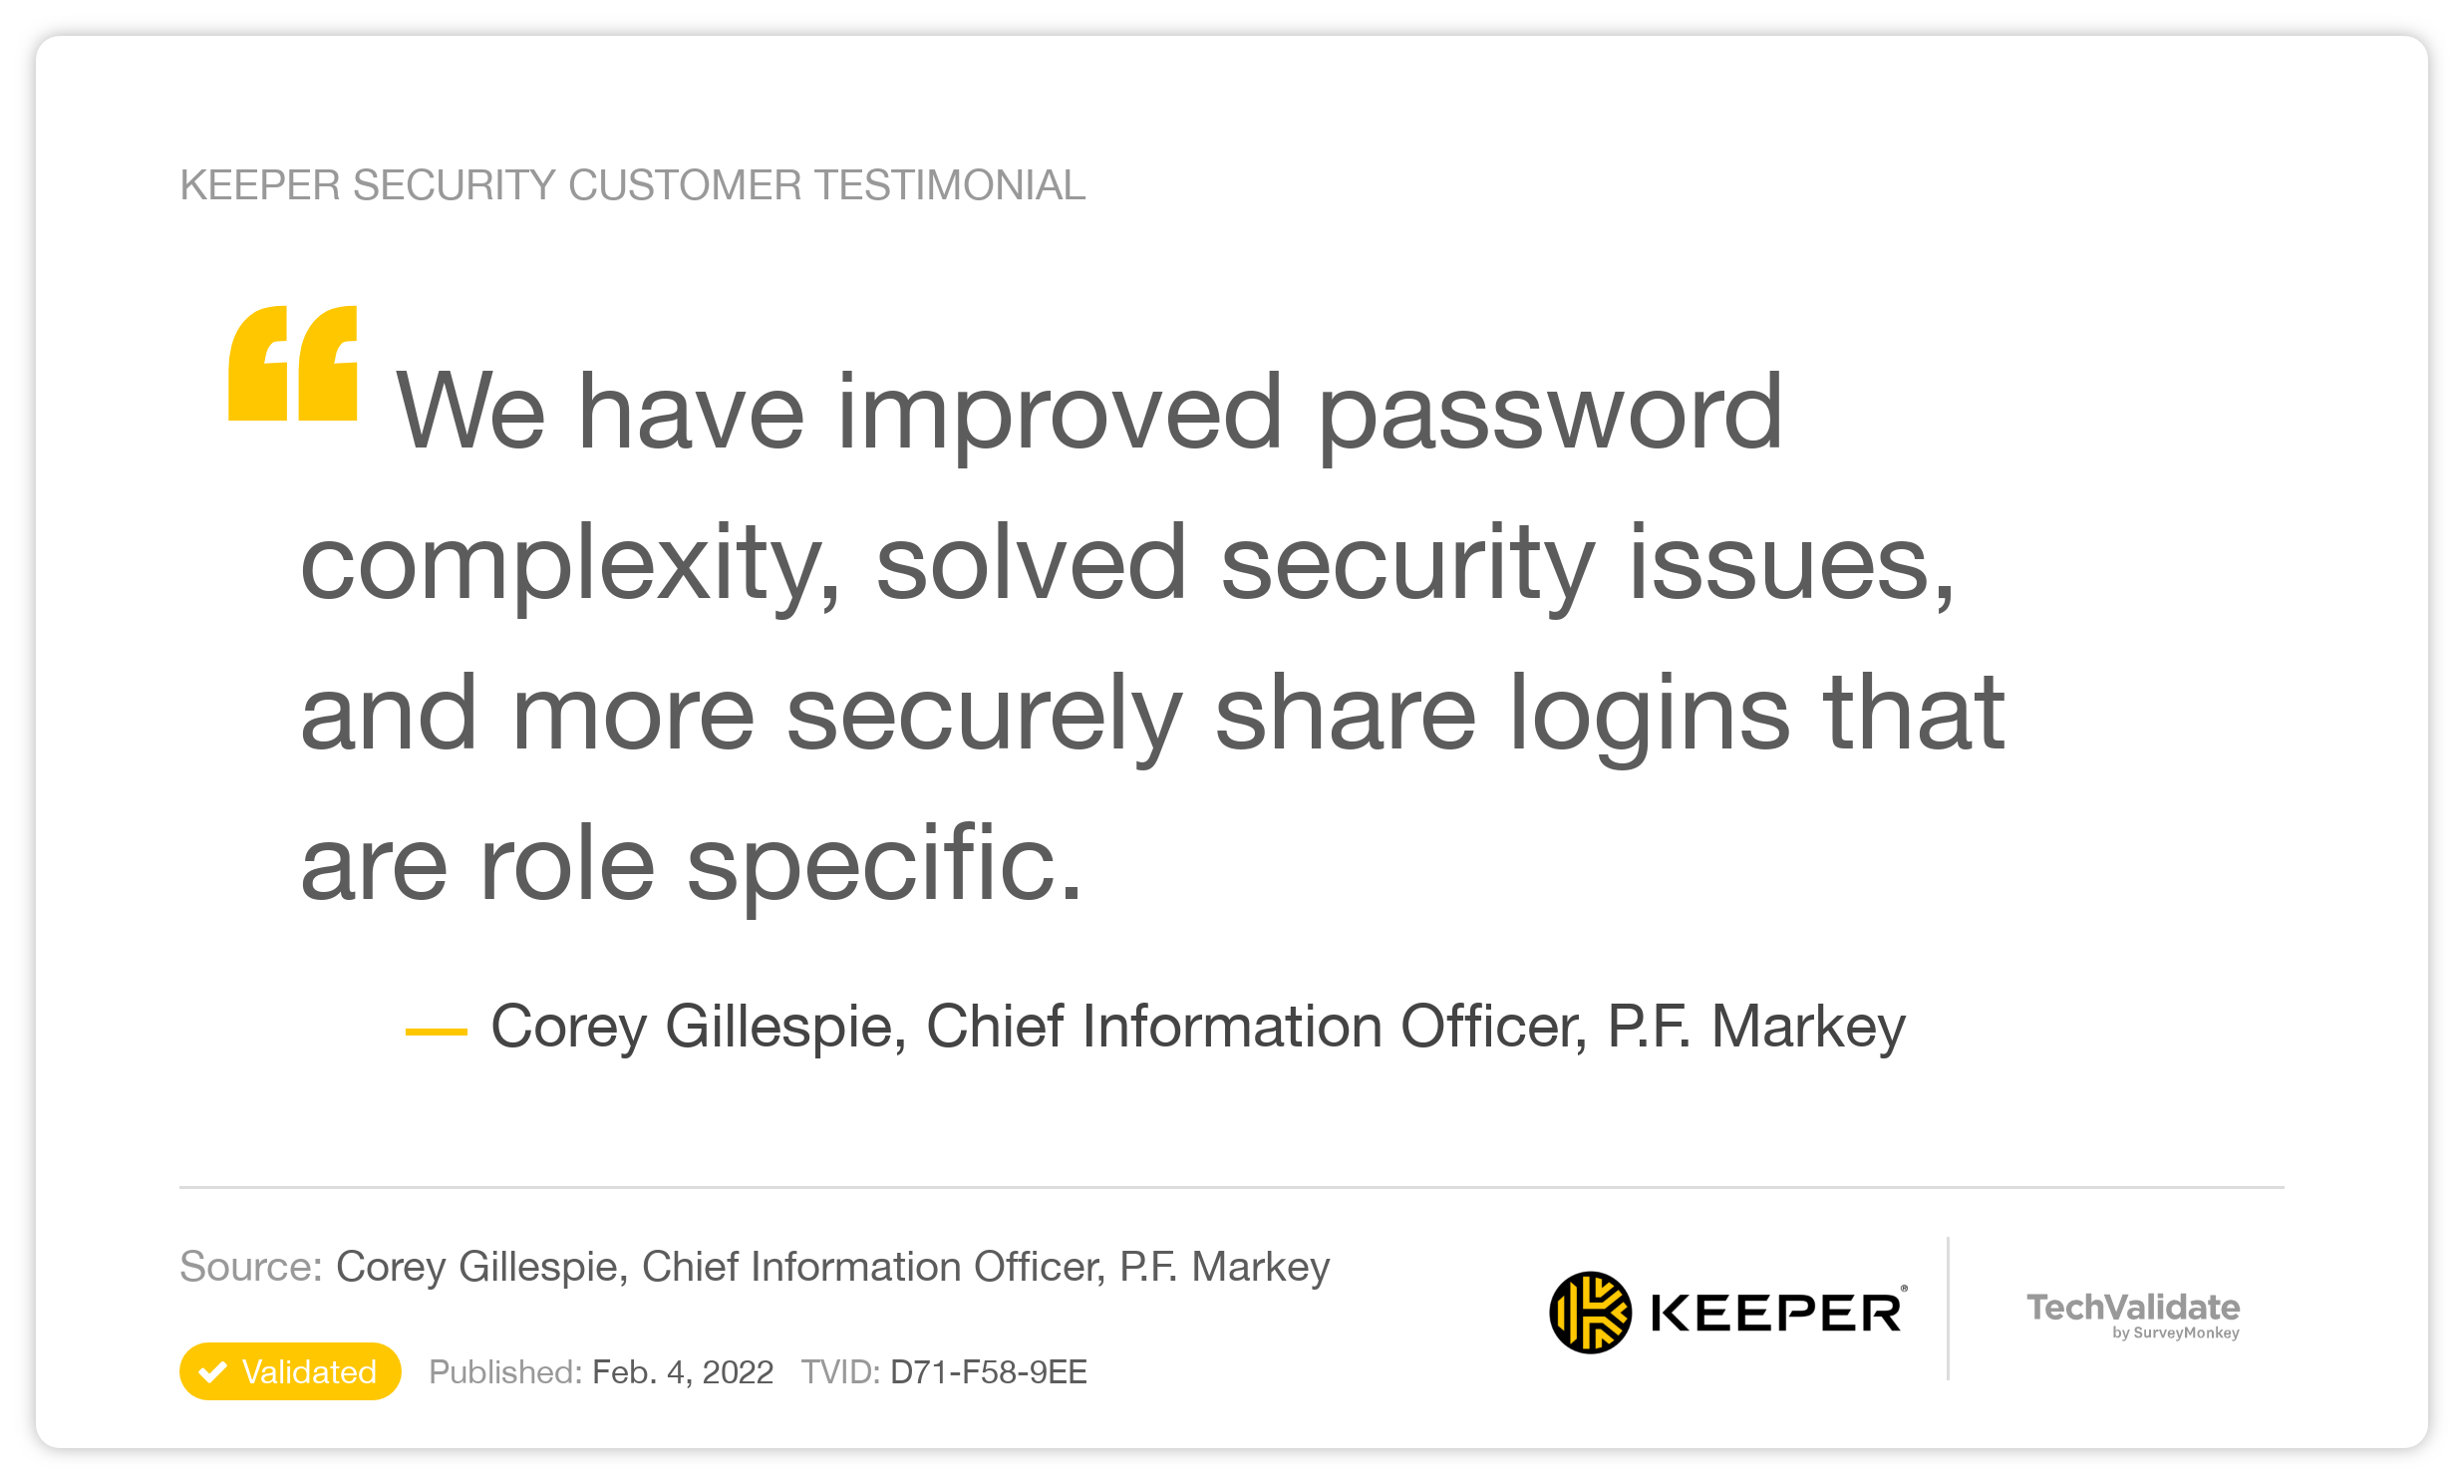 We have improved password complexity, solved security issues, and more securely share logins that are role specific.